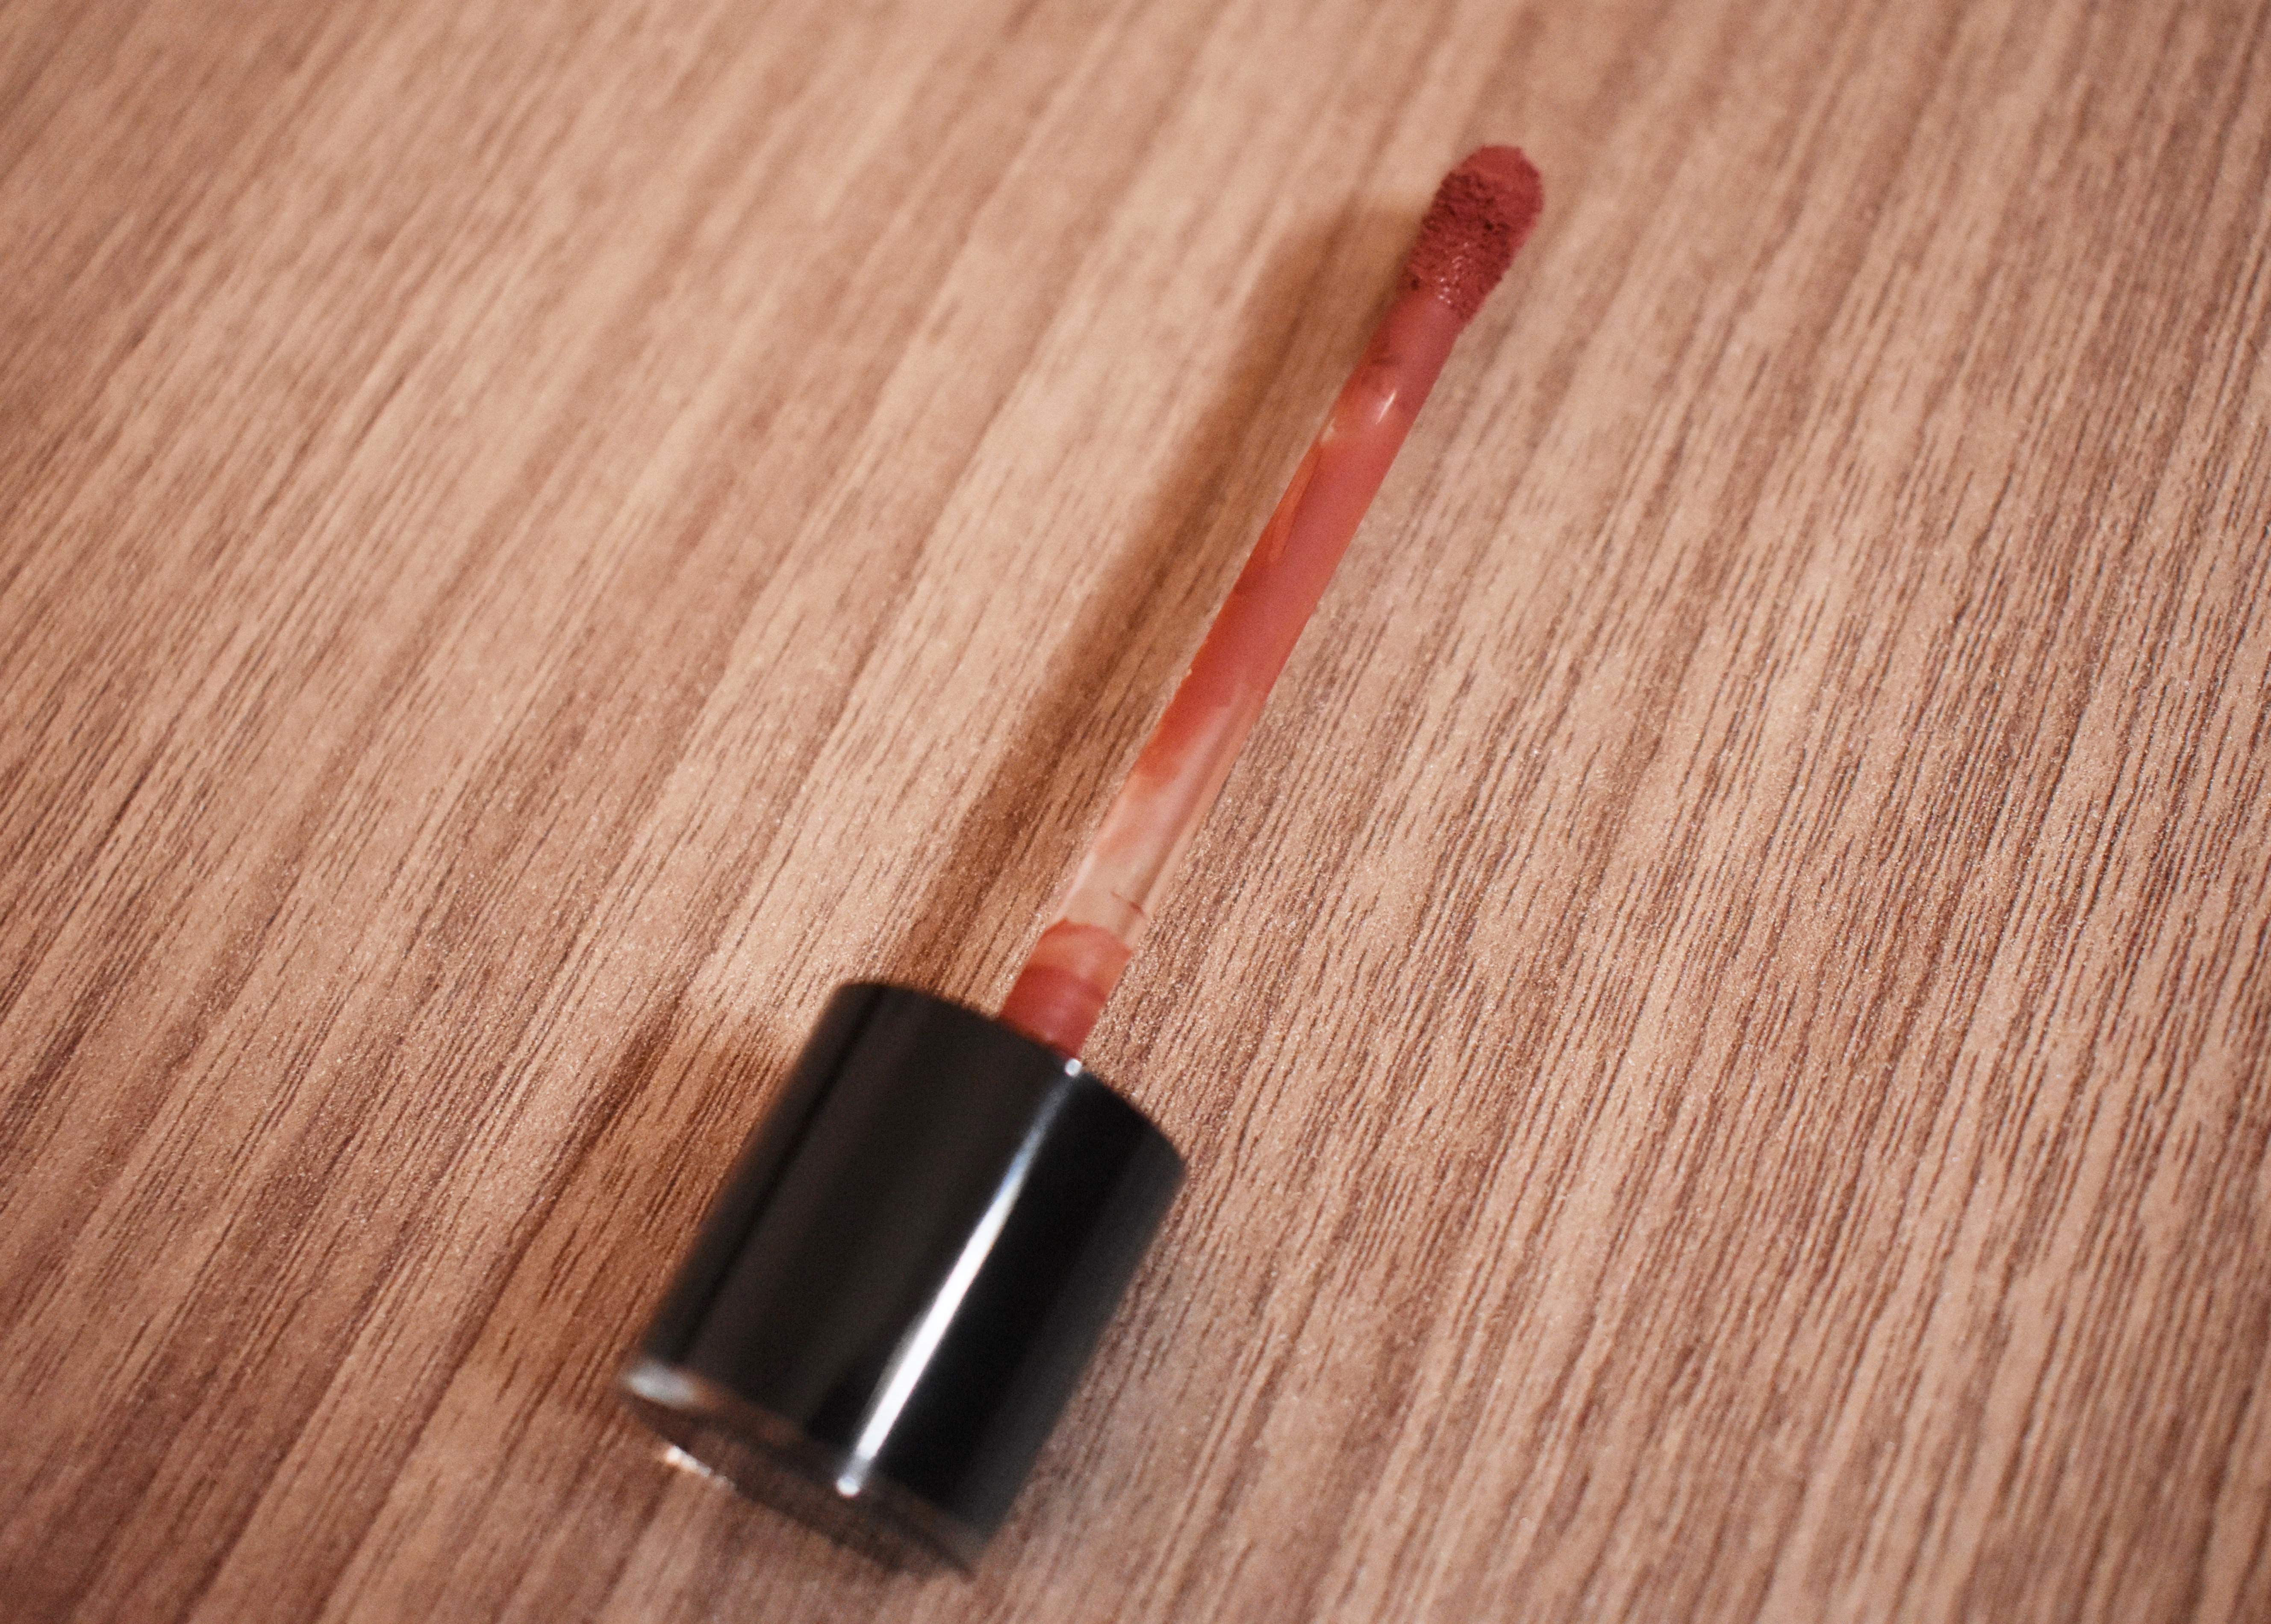 Wet n Wild Liquid Lipstick Give Me Mocha Review Swatches